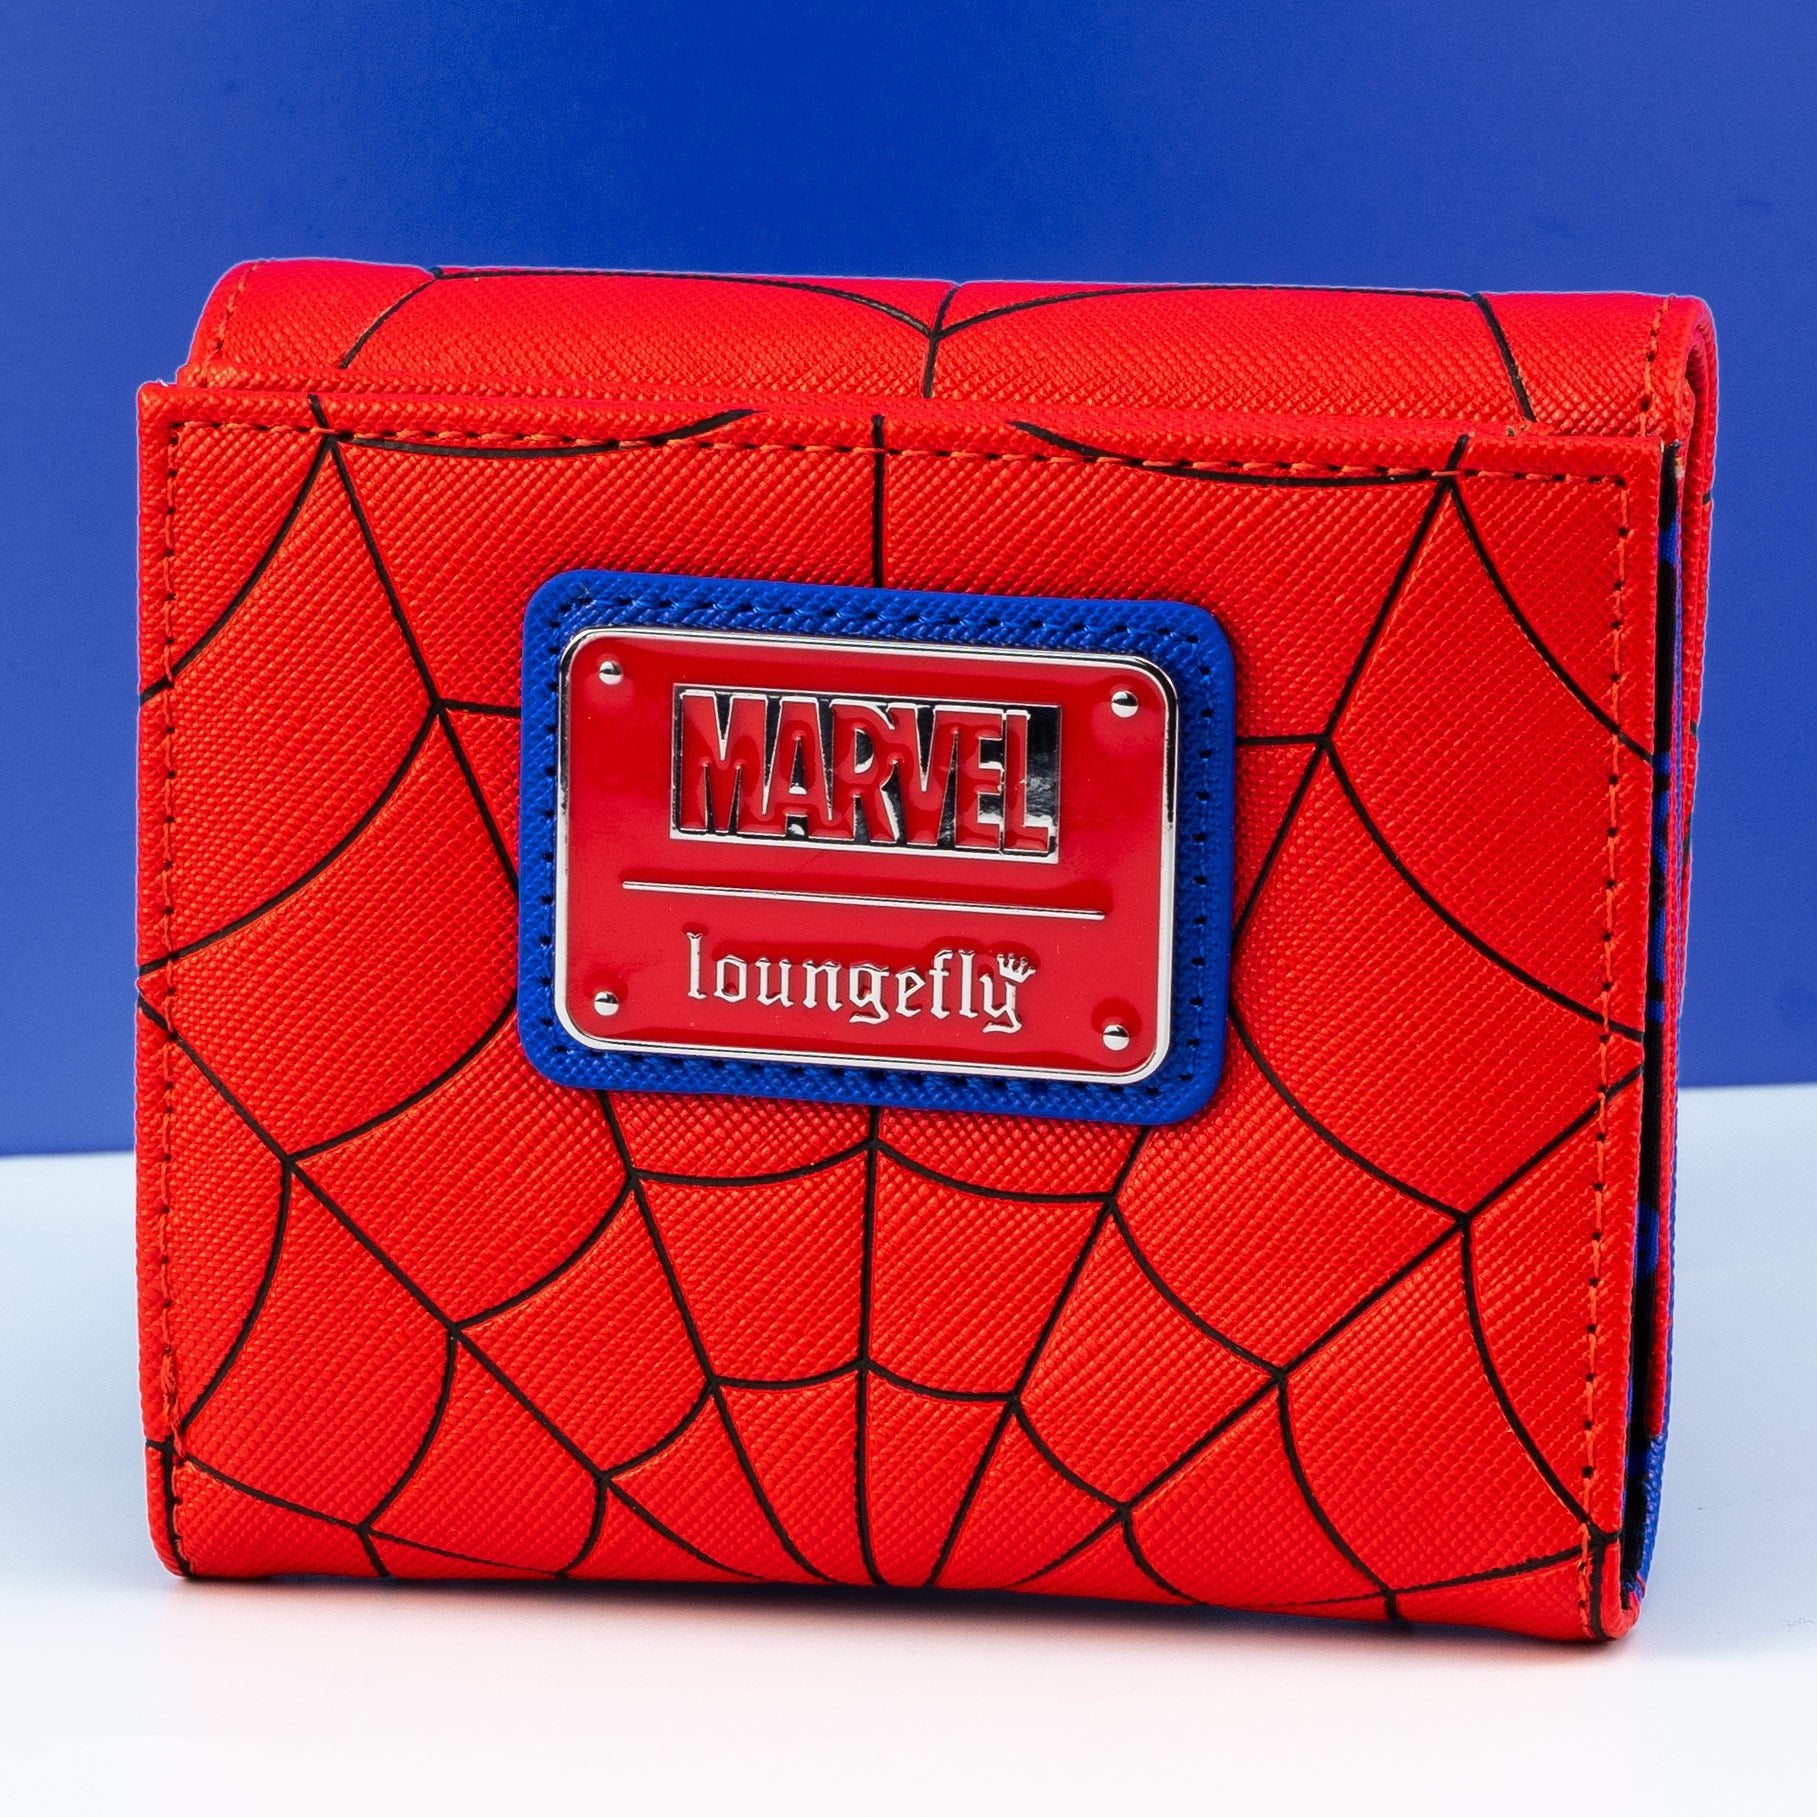 Loungefly x Marvel Spider - man Cosplay Purse - GeekCore